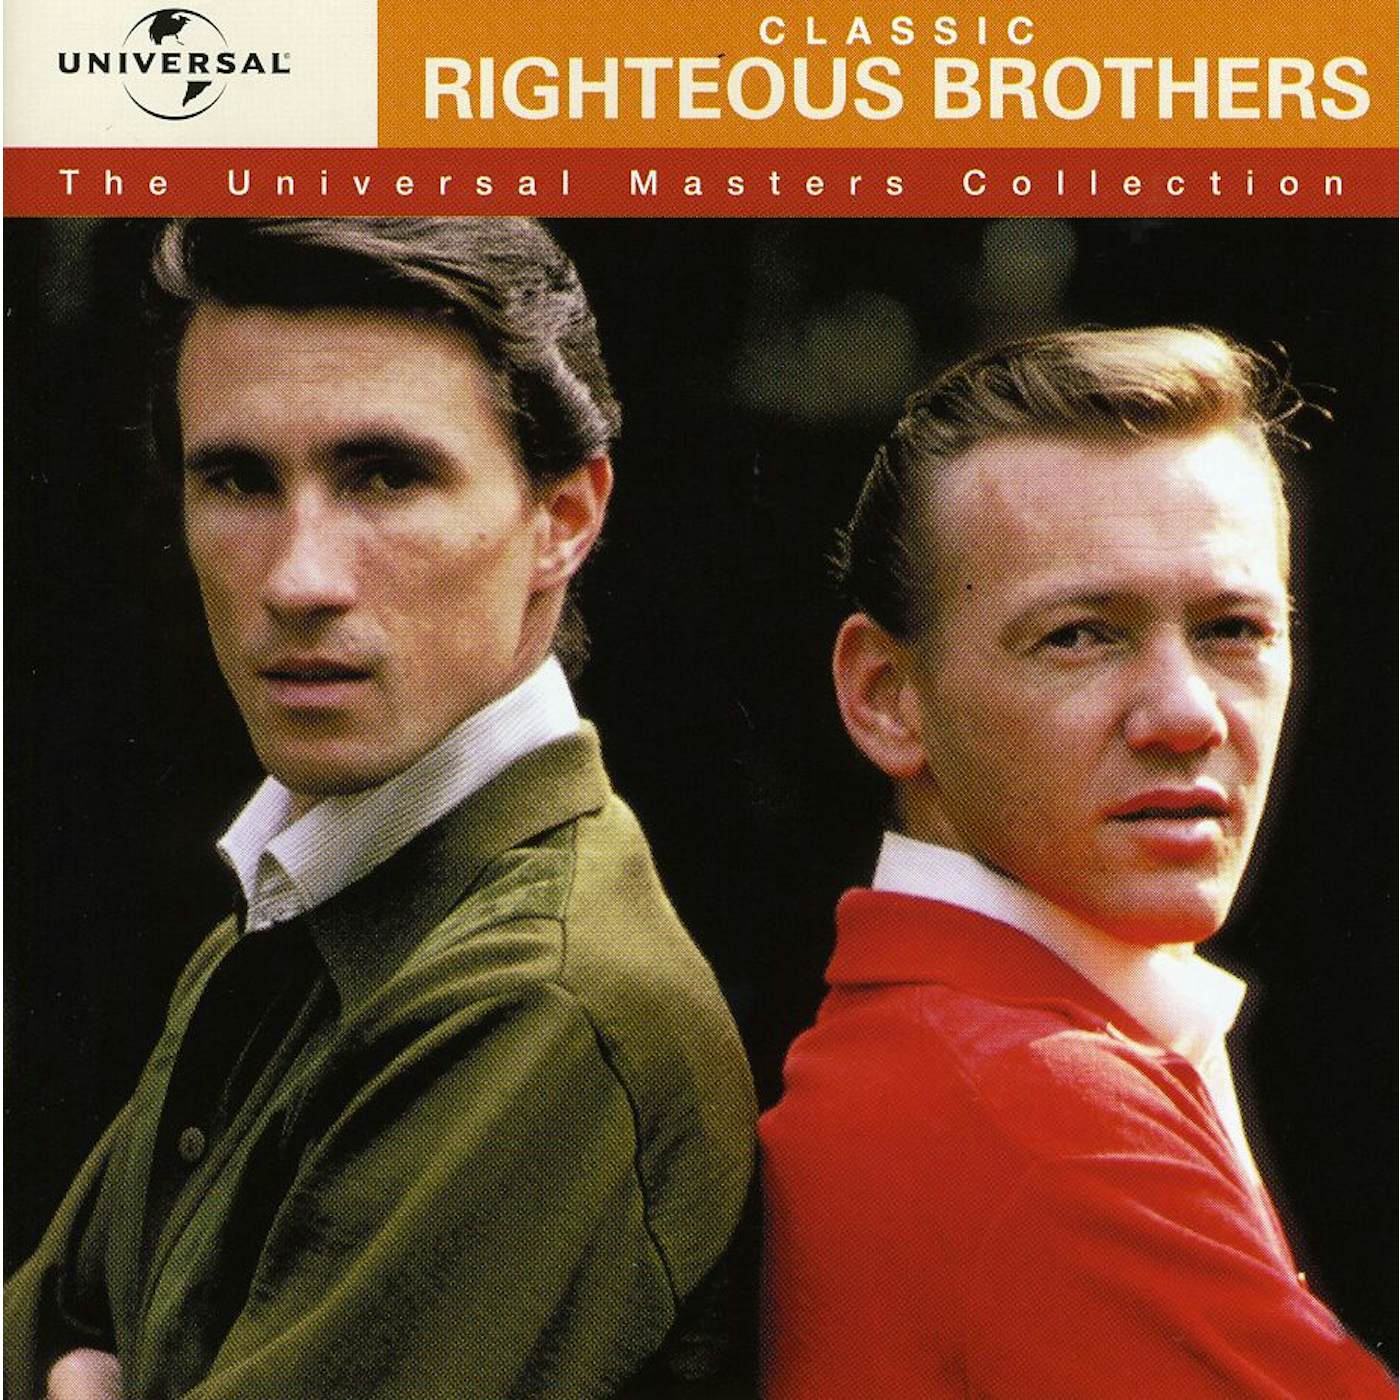 The Righteous Brothers UNIVERSAL MASTERS COLLECTION CD